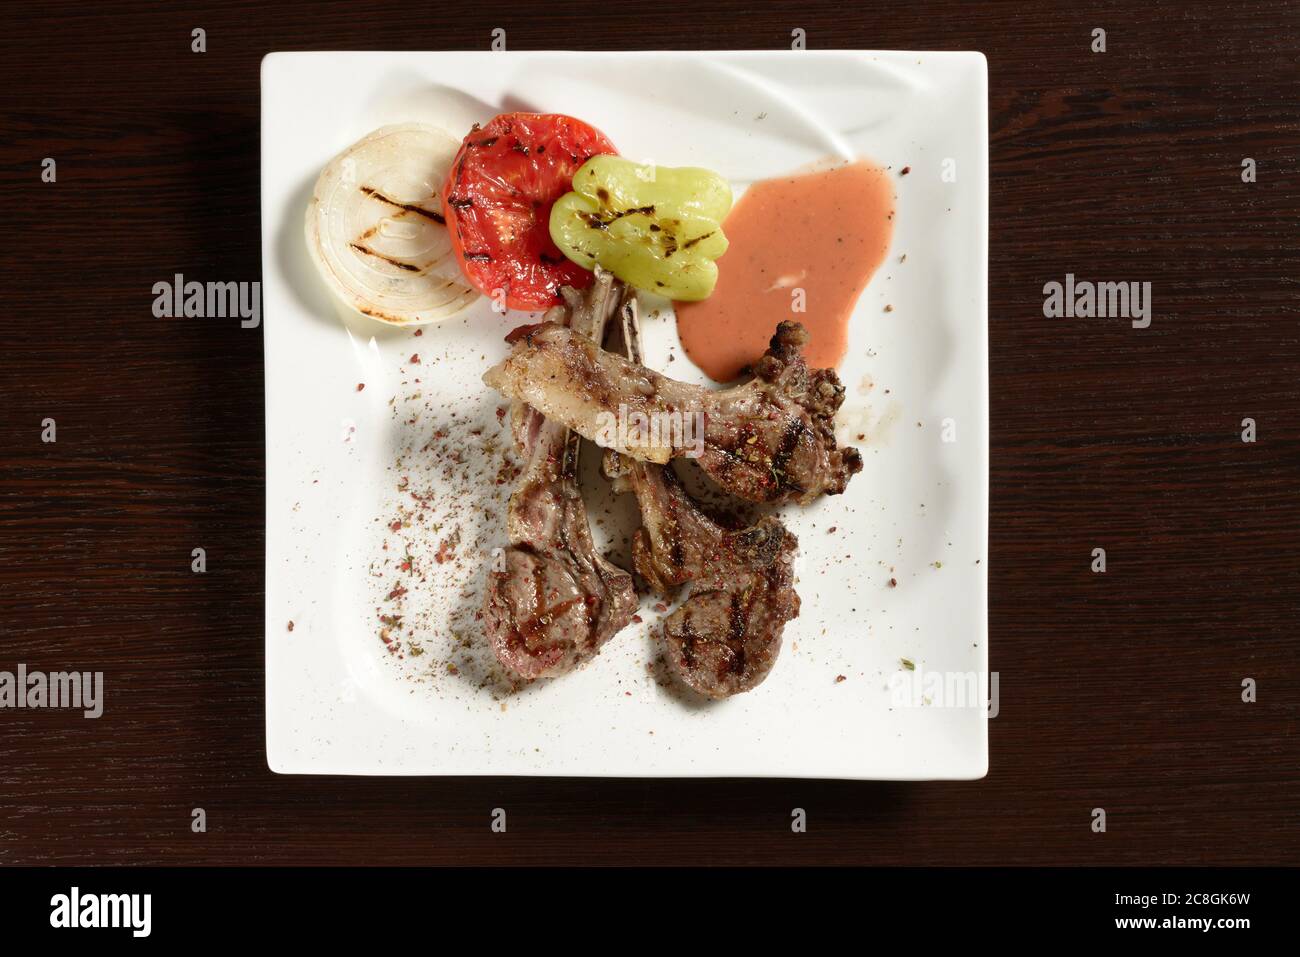 Barbecue beef ribs with grilled vegetables of tomato, onion and bell pepper on a square plate on a wooden table. Top view. Photos for restaurant Stock Photo